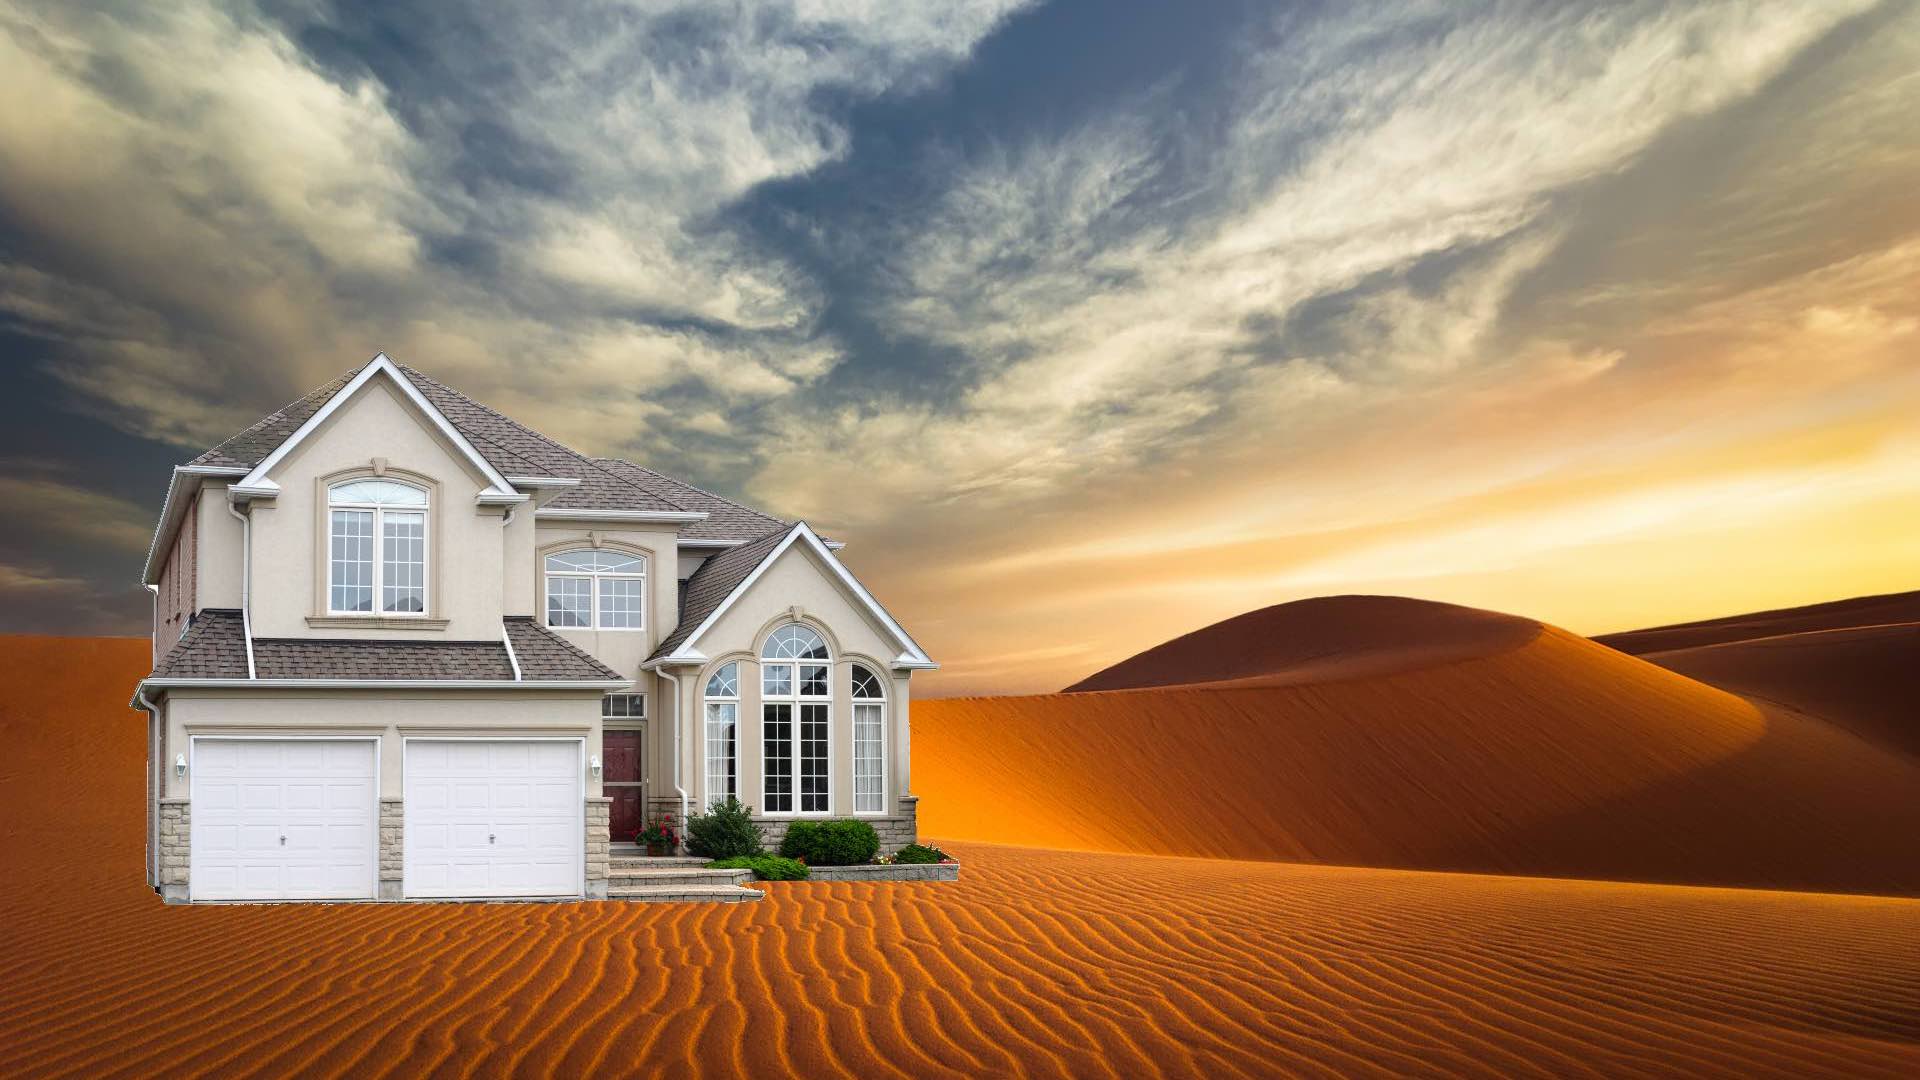 A house plonked in the middle of a very sandy desert